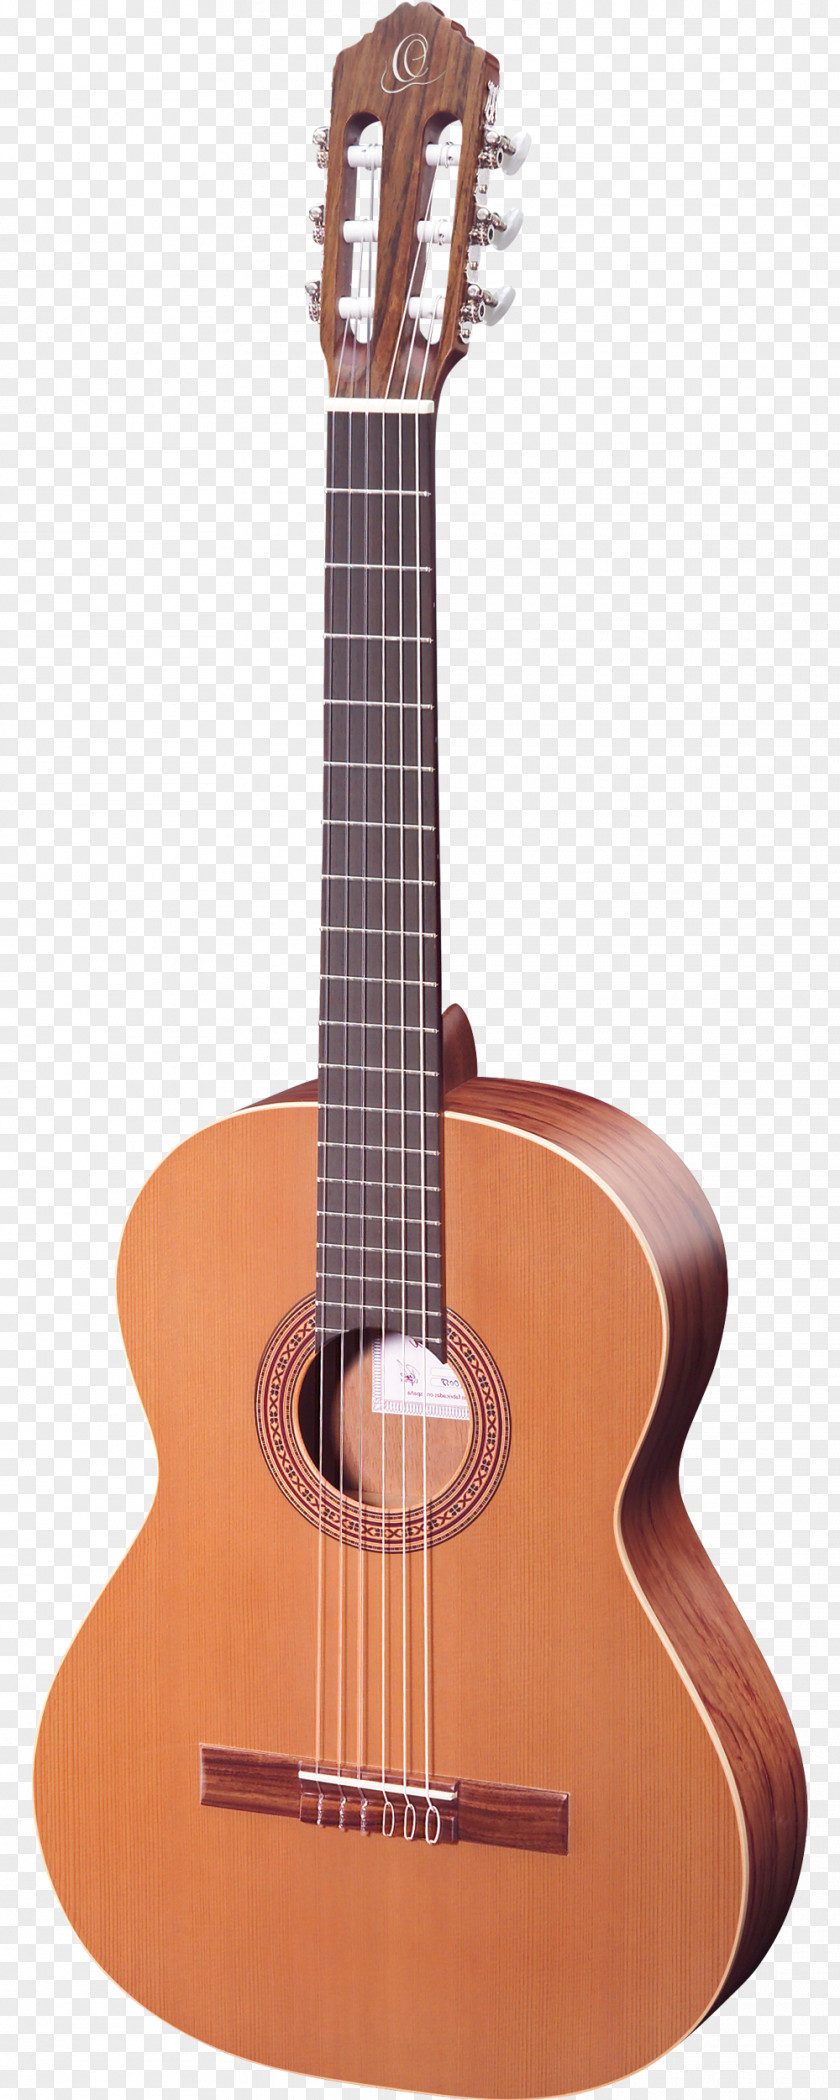 Guitar Classical Musical Instruments Acoustic Fingerboard PNG